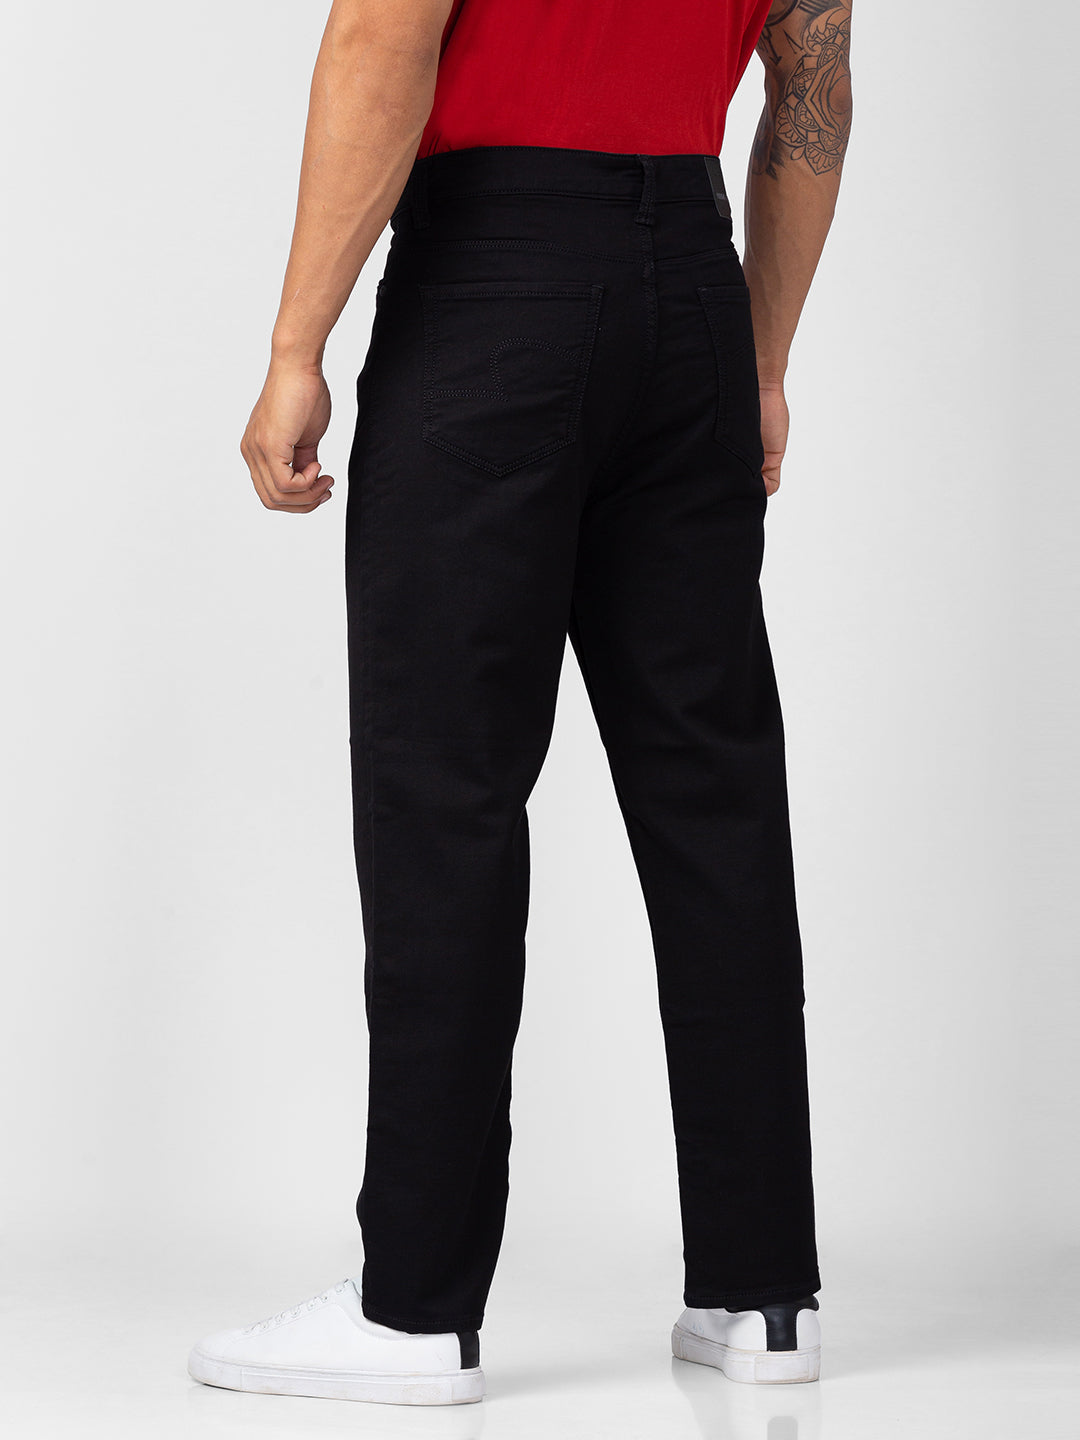 Black Jeans for Men | Abercrombie & Fitch